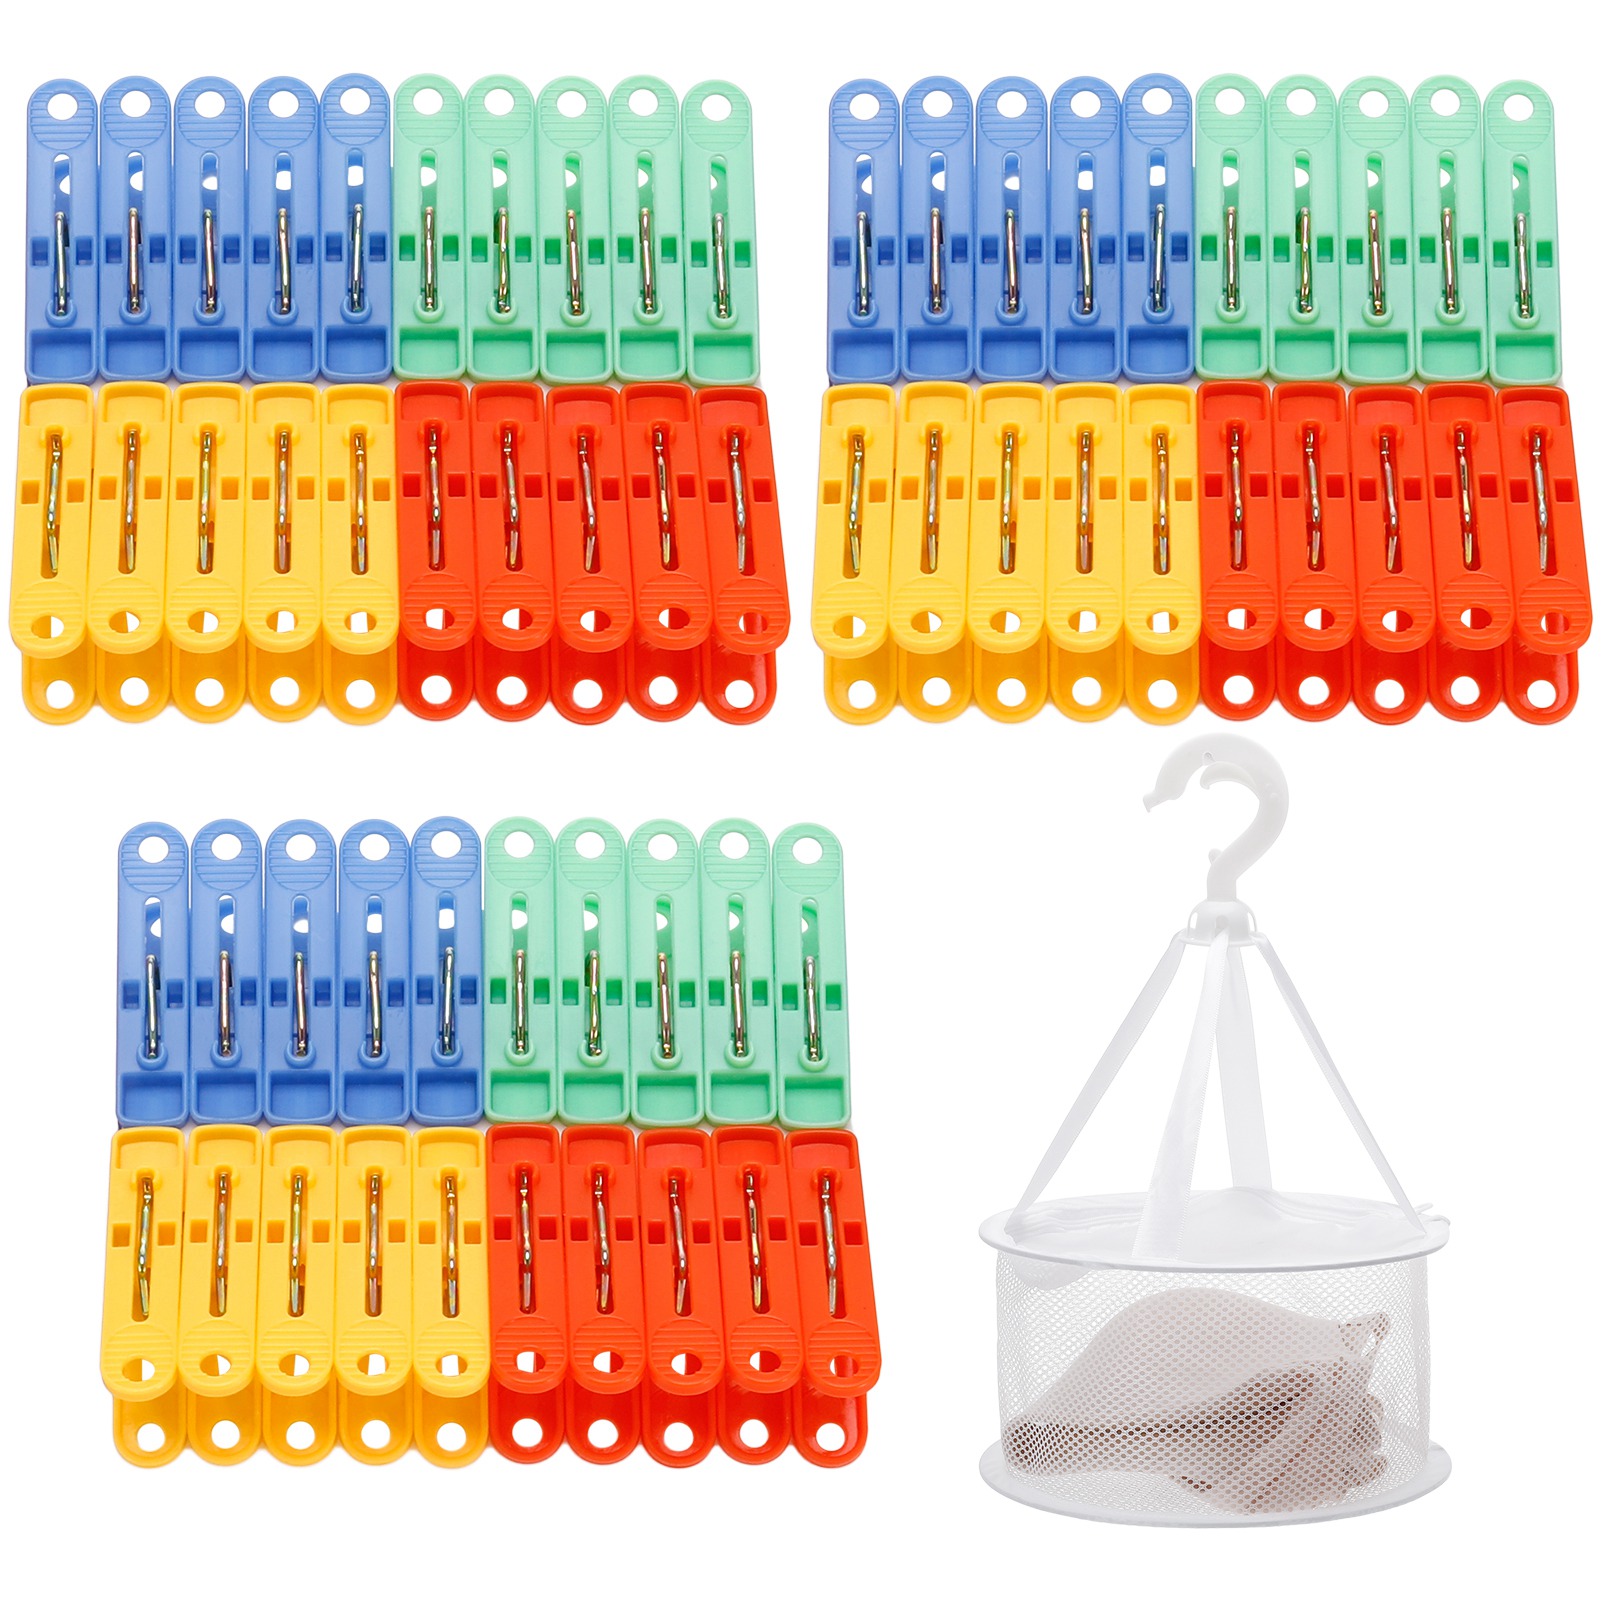 sixwipe 60 Pack Colorful Plastic Clothespins, Laundry Clips with Mesh ...